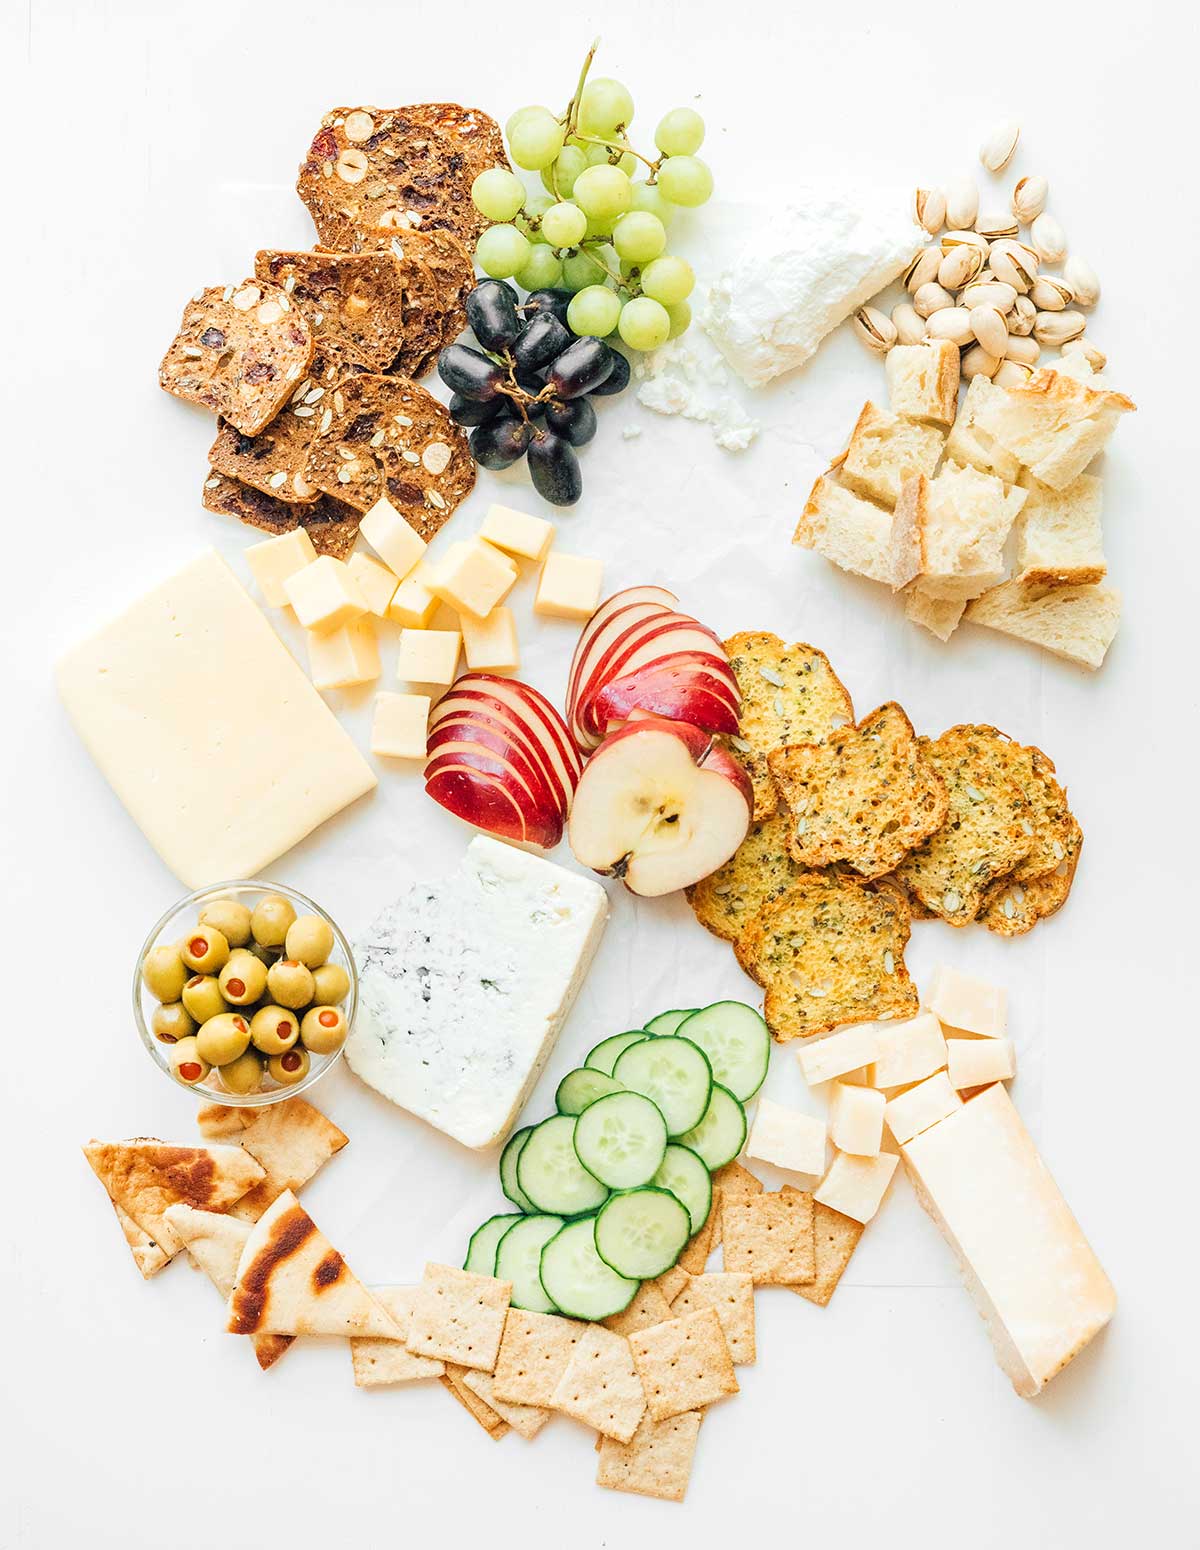 A charcuterie cheese platter that is coming together with crackers, breads, fruits, veggies, cheeses, nuts, and olives